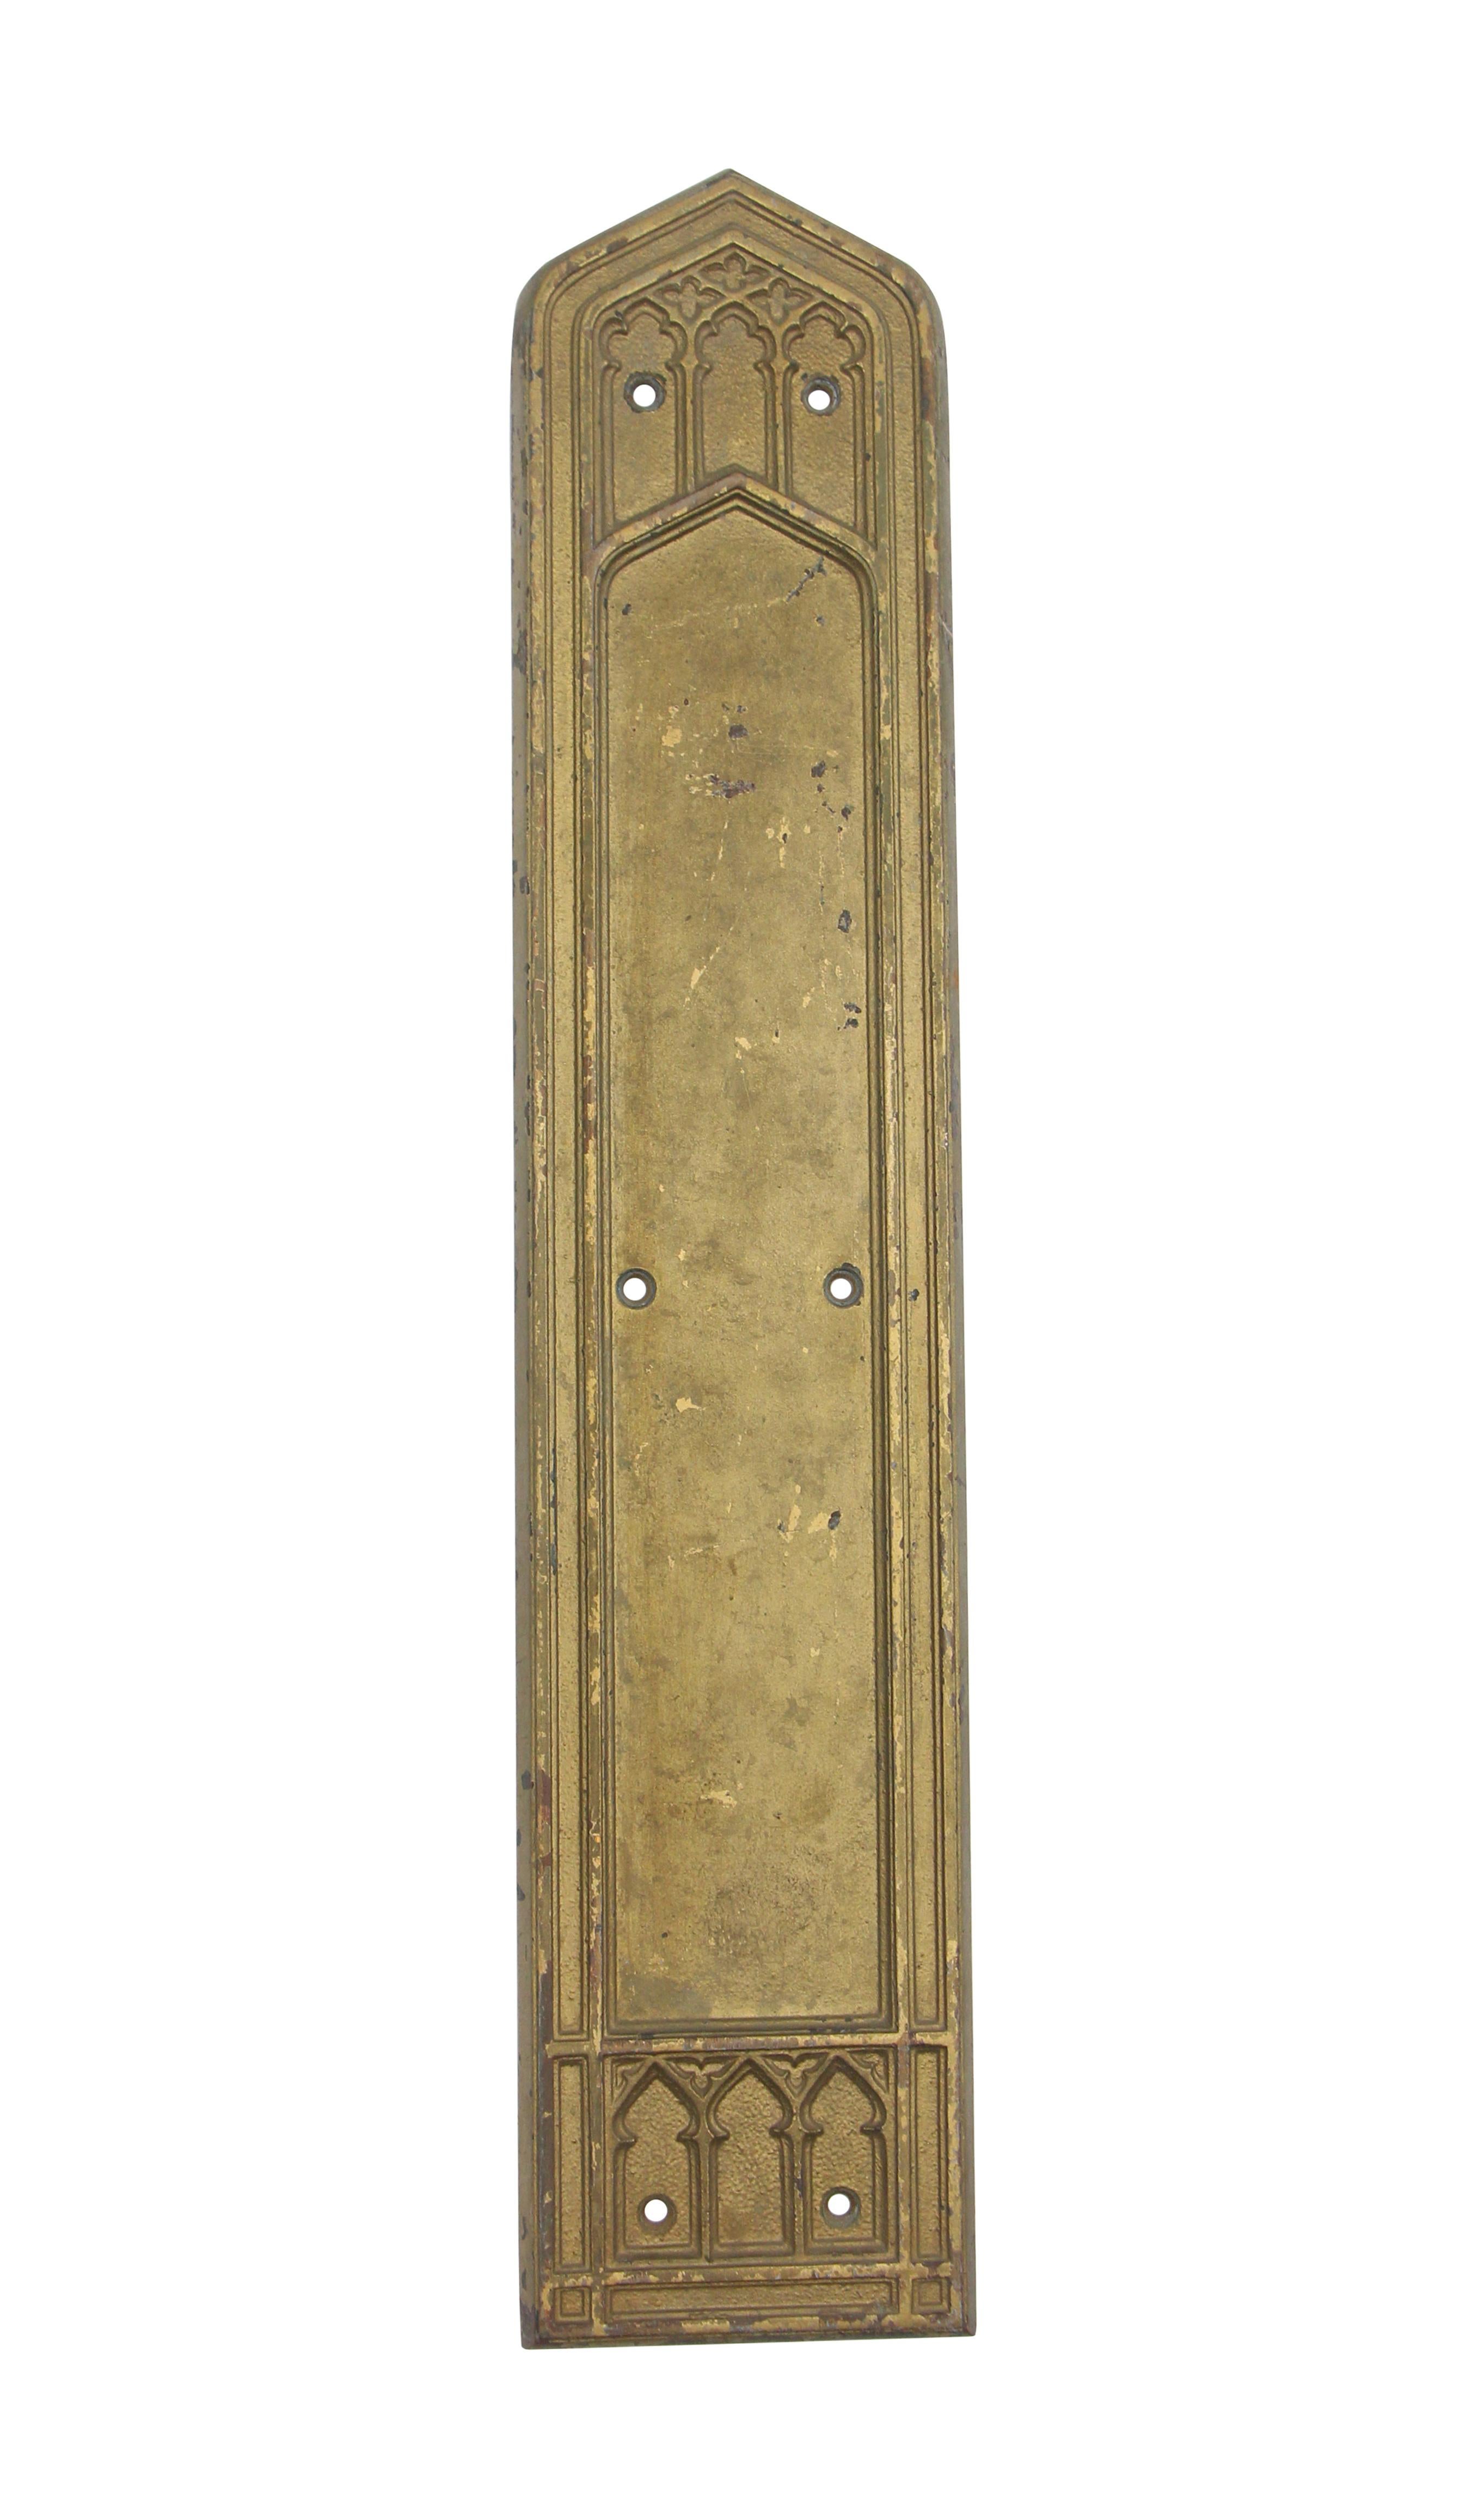 Early 20th century solid cast bronze push plate designed in a Grand Gothic style. Come with original gold paint. Made by Corbin, one of the premier hardware manufacturers in the US.